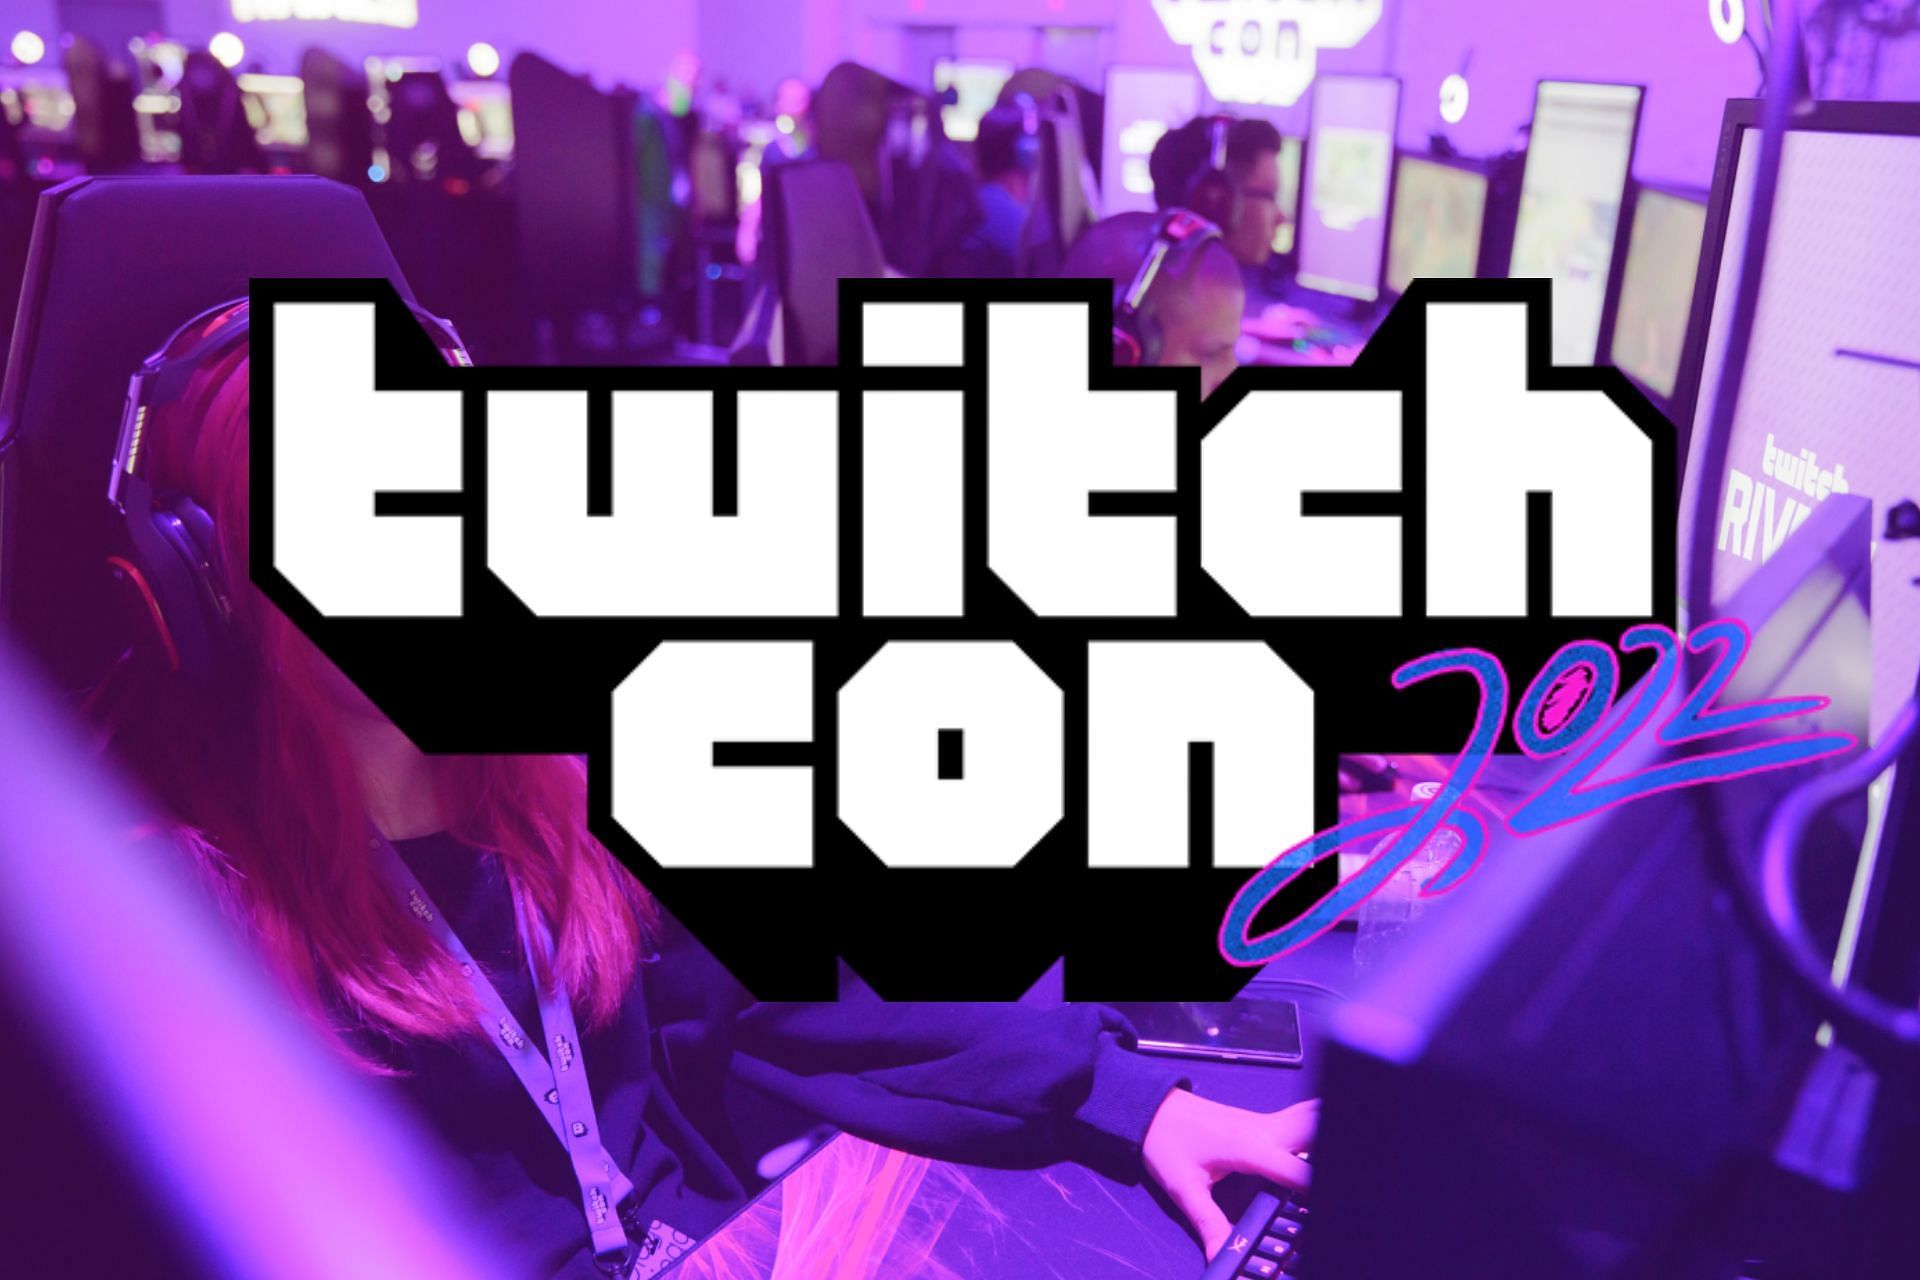 TwitchCon 2022 San Diego Date, time, schedule, guests, and more